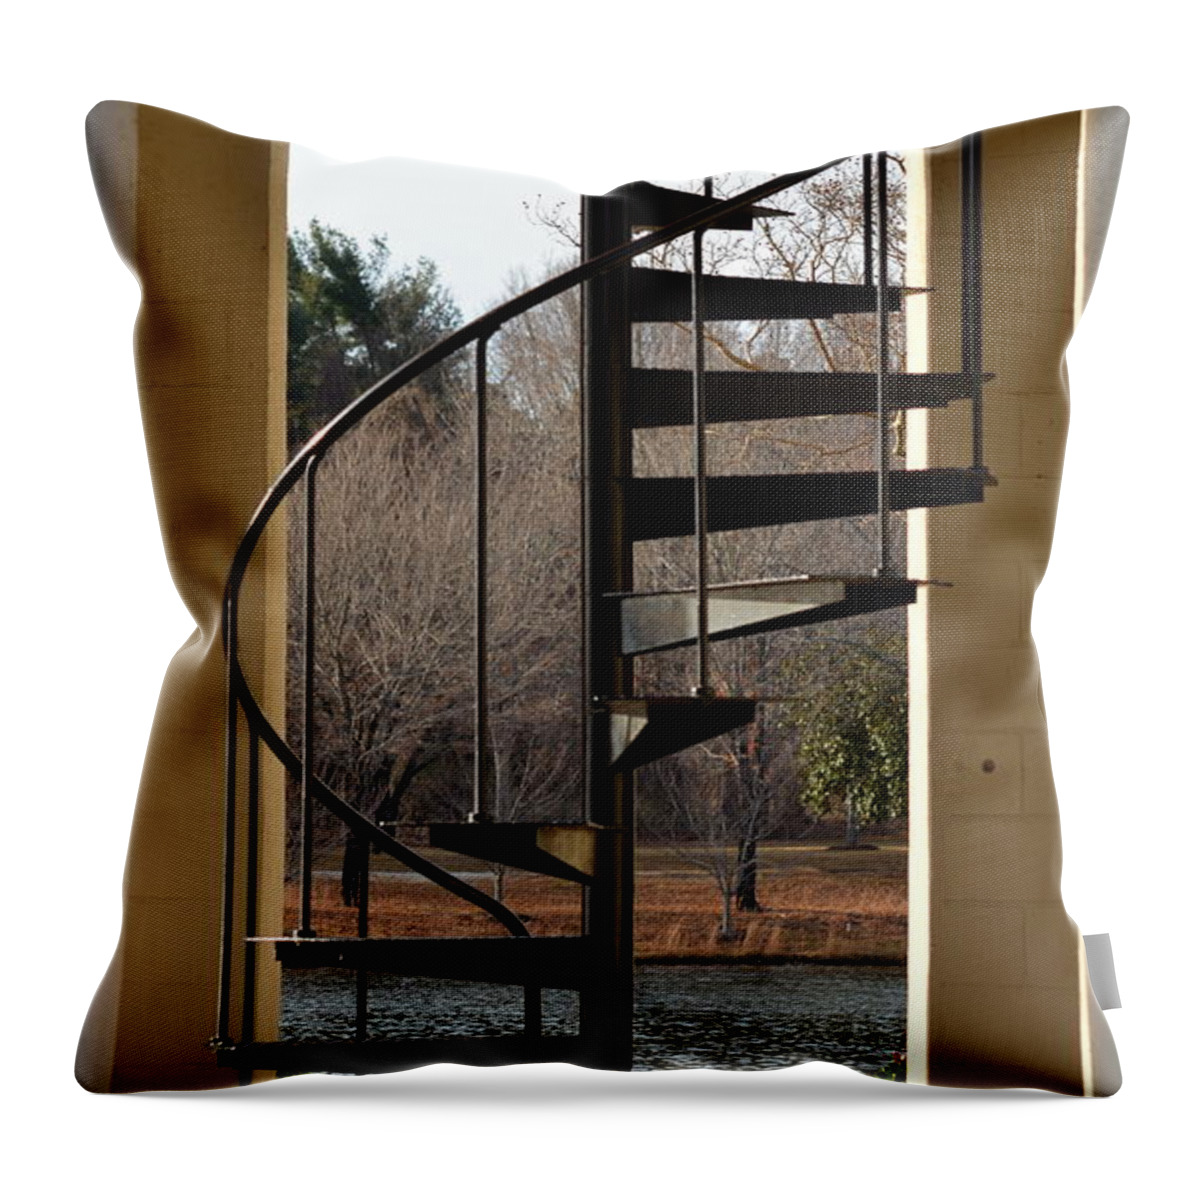 Spiral Staircase Throw Pillow featuring the photograph Spiral Staircase by Corinne Rhode